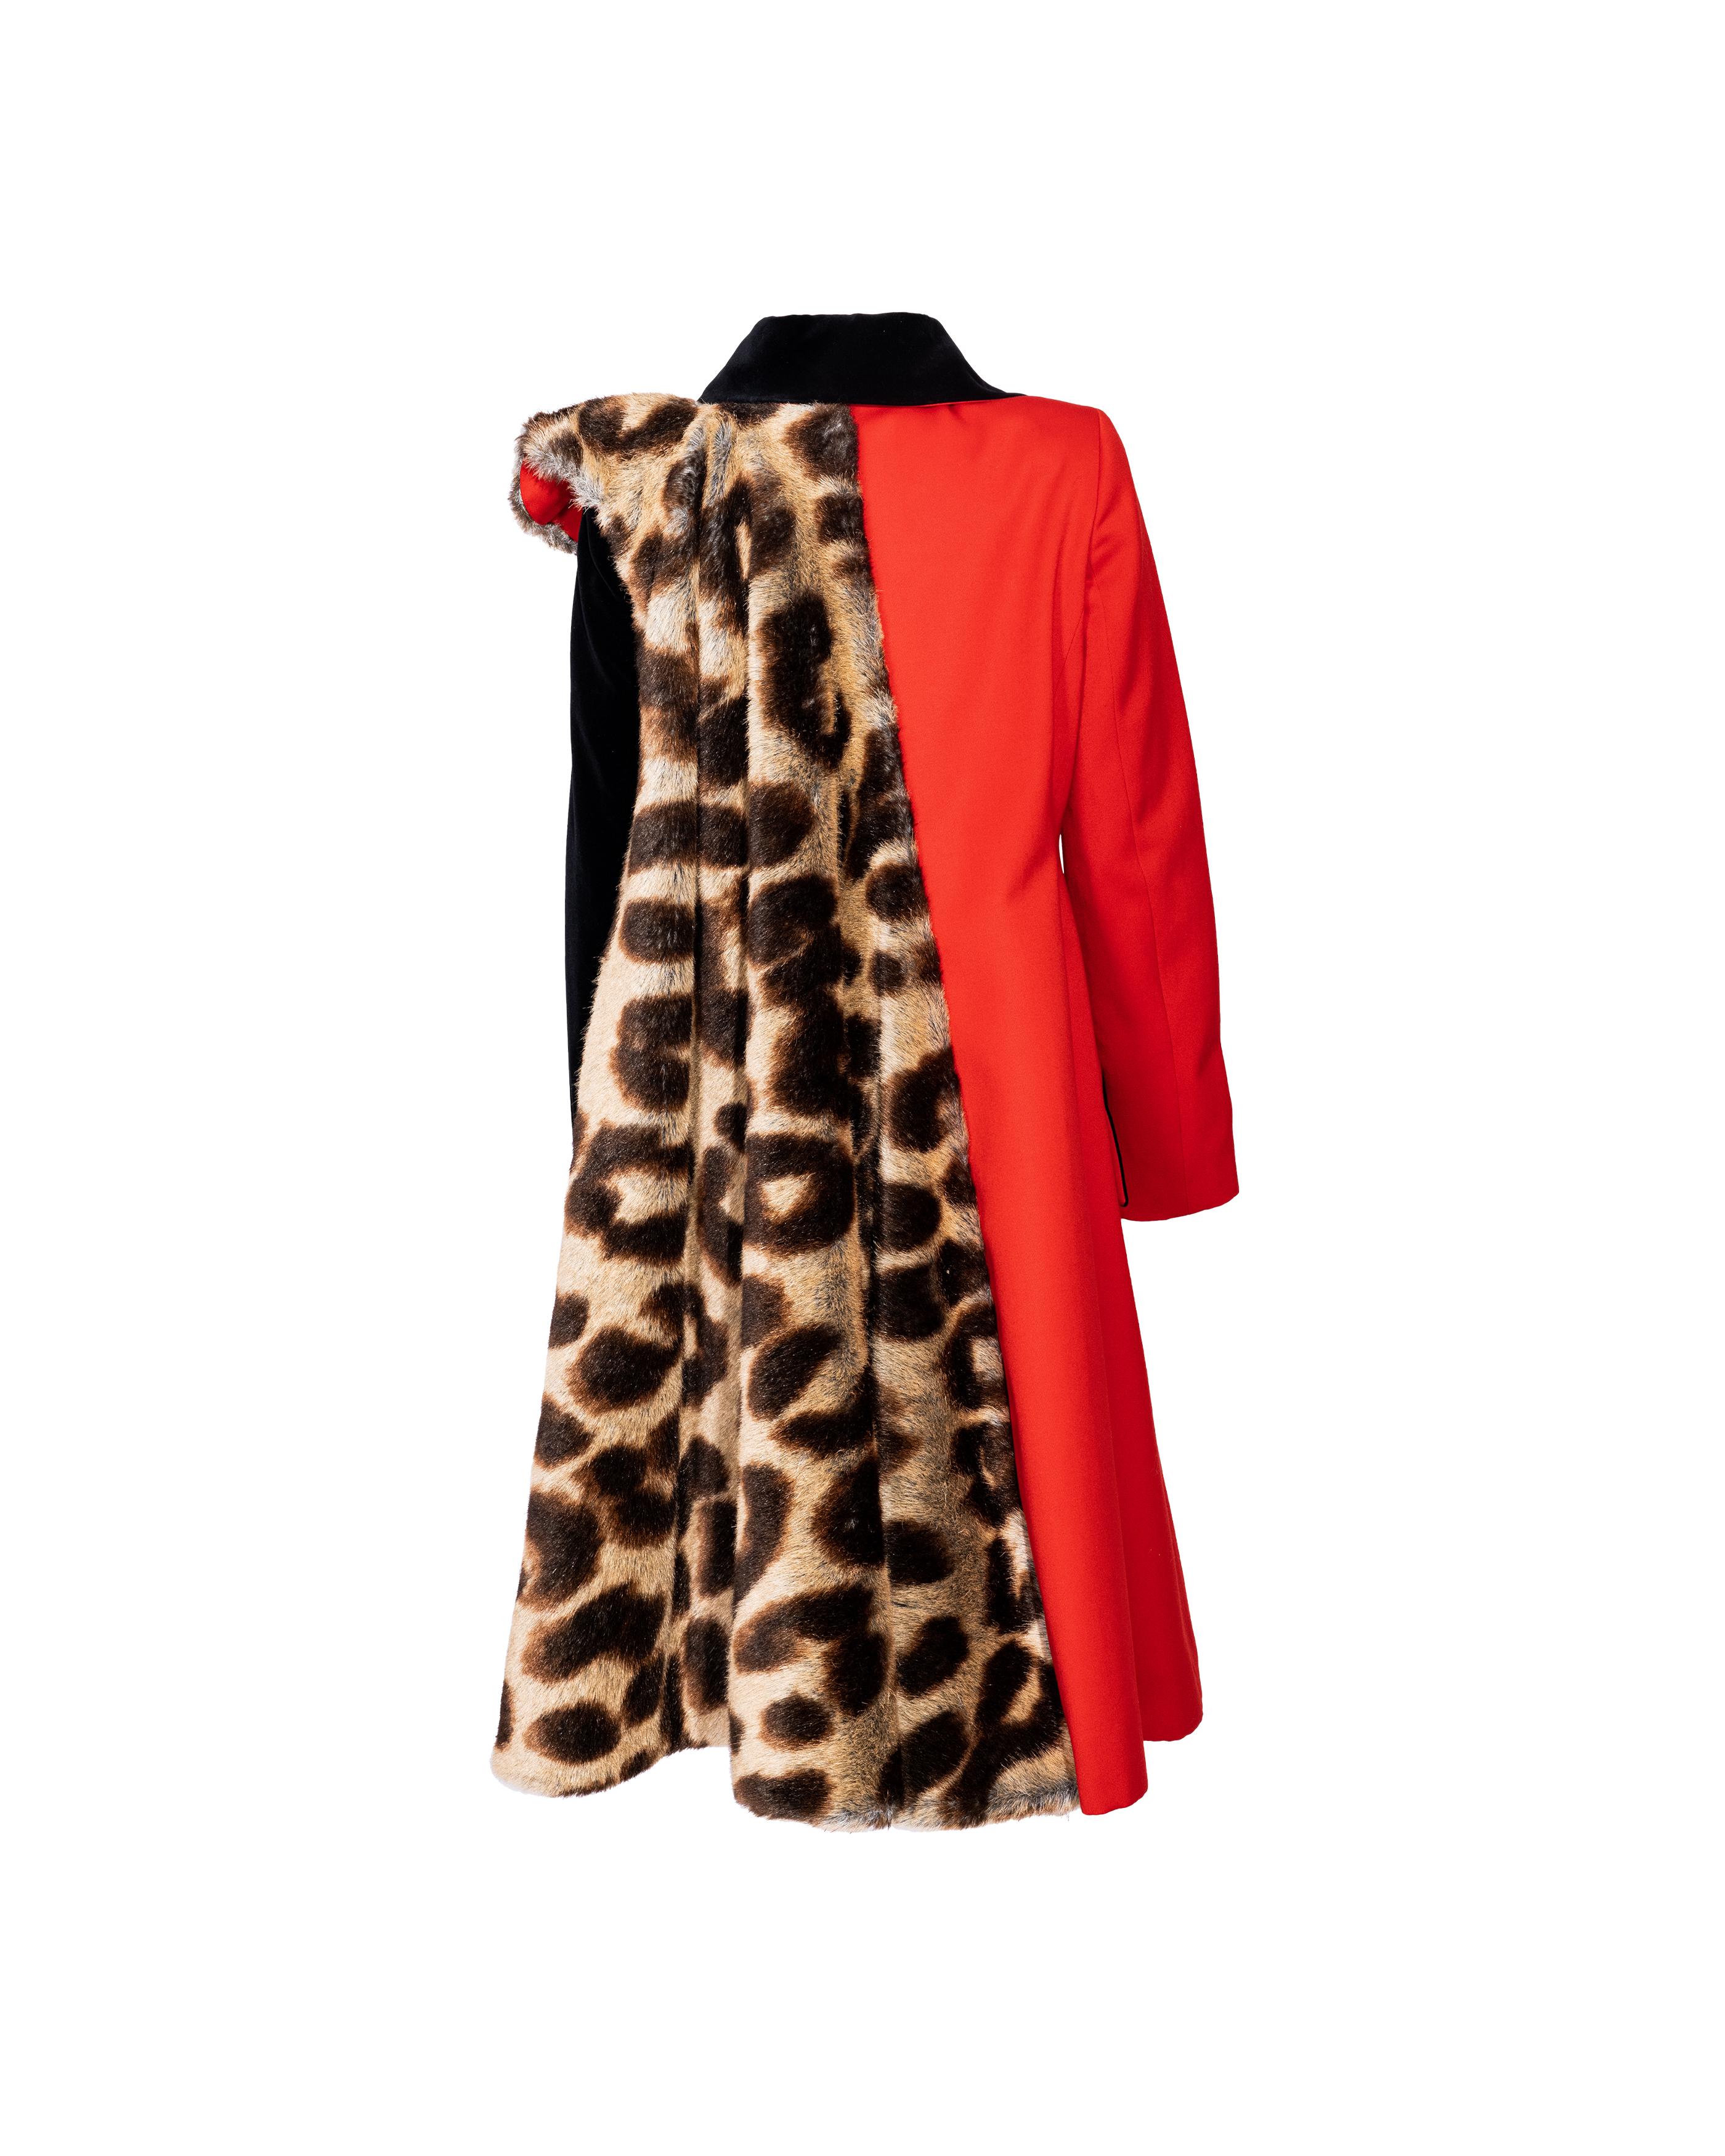 A/W 1996 Vivienne Westwood Red and Leopard Print Contrast Coat For Sale 2